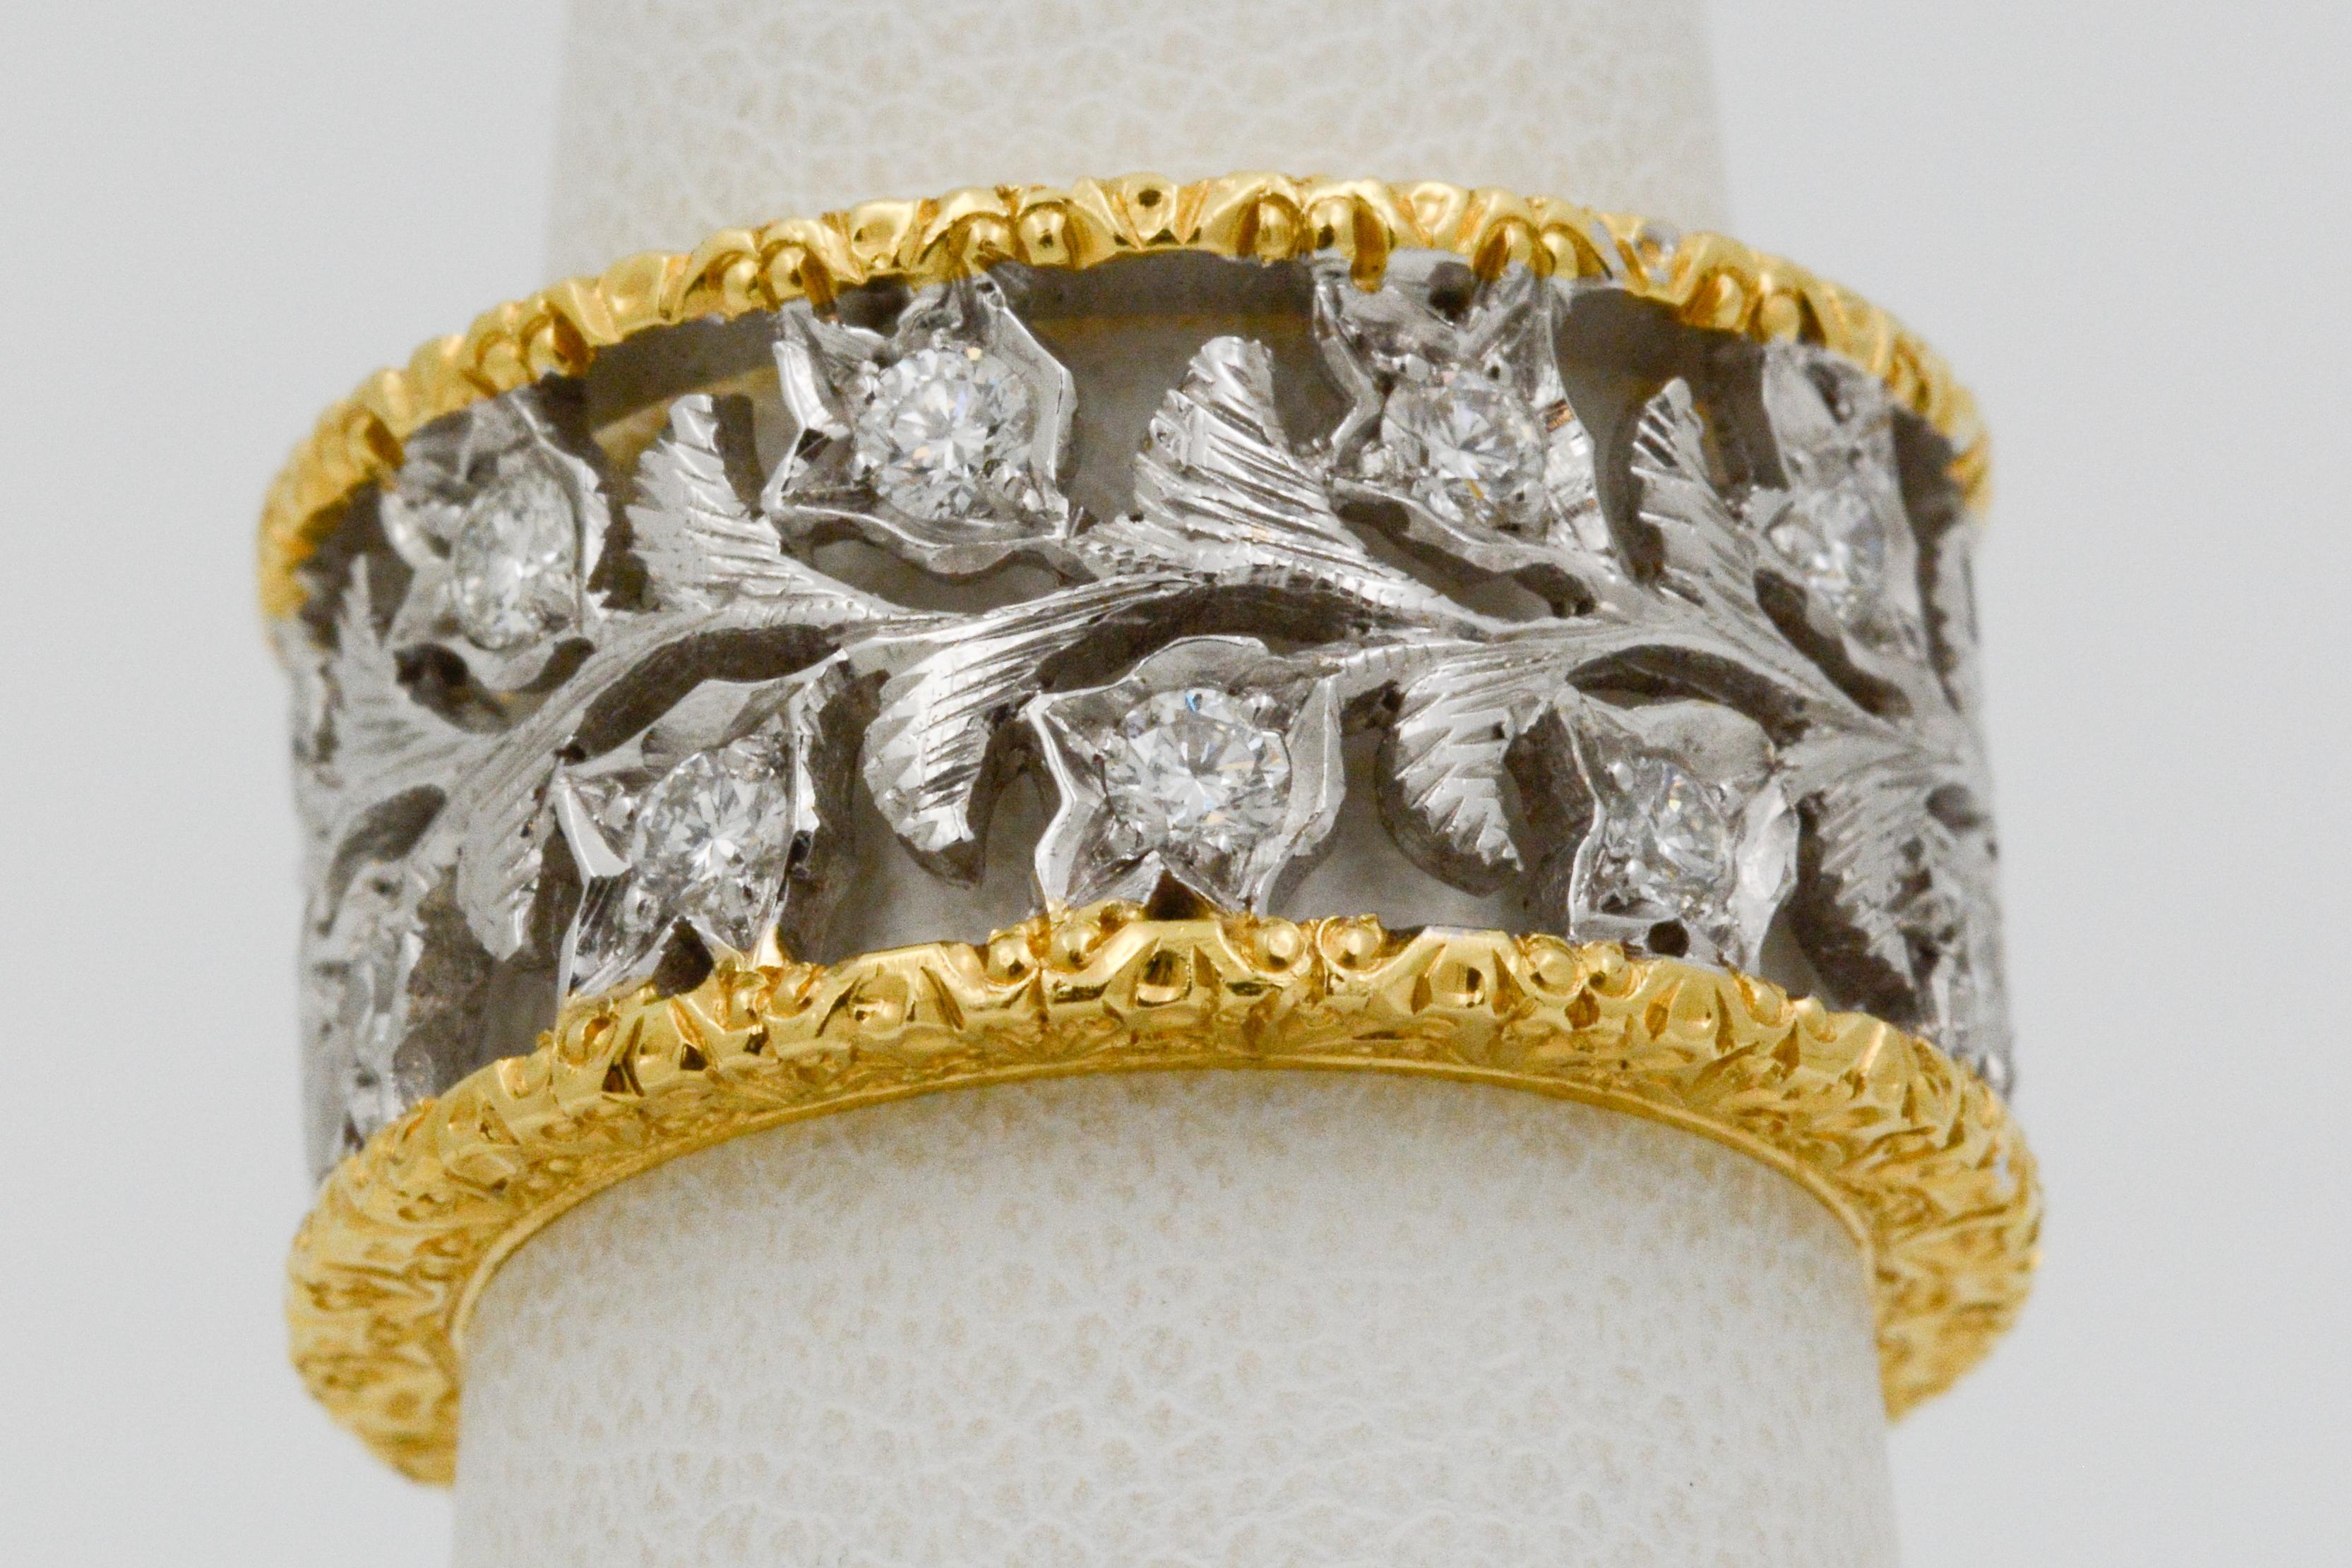 This amazing 18 karat yellow and white gold ring is crafted in an open white gold leaf pattern that extends all the way around the ring, bordered by two hand engraved 18 karat yellow gold rims. The leaf pattern is enhanced with 20 round brilliant